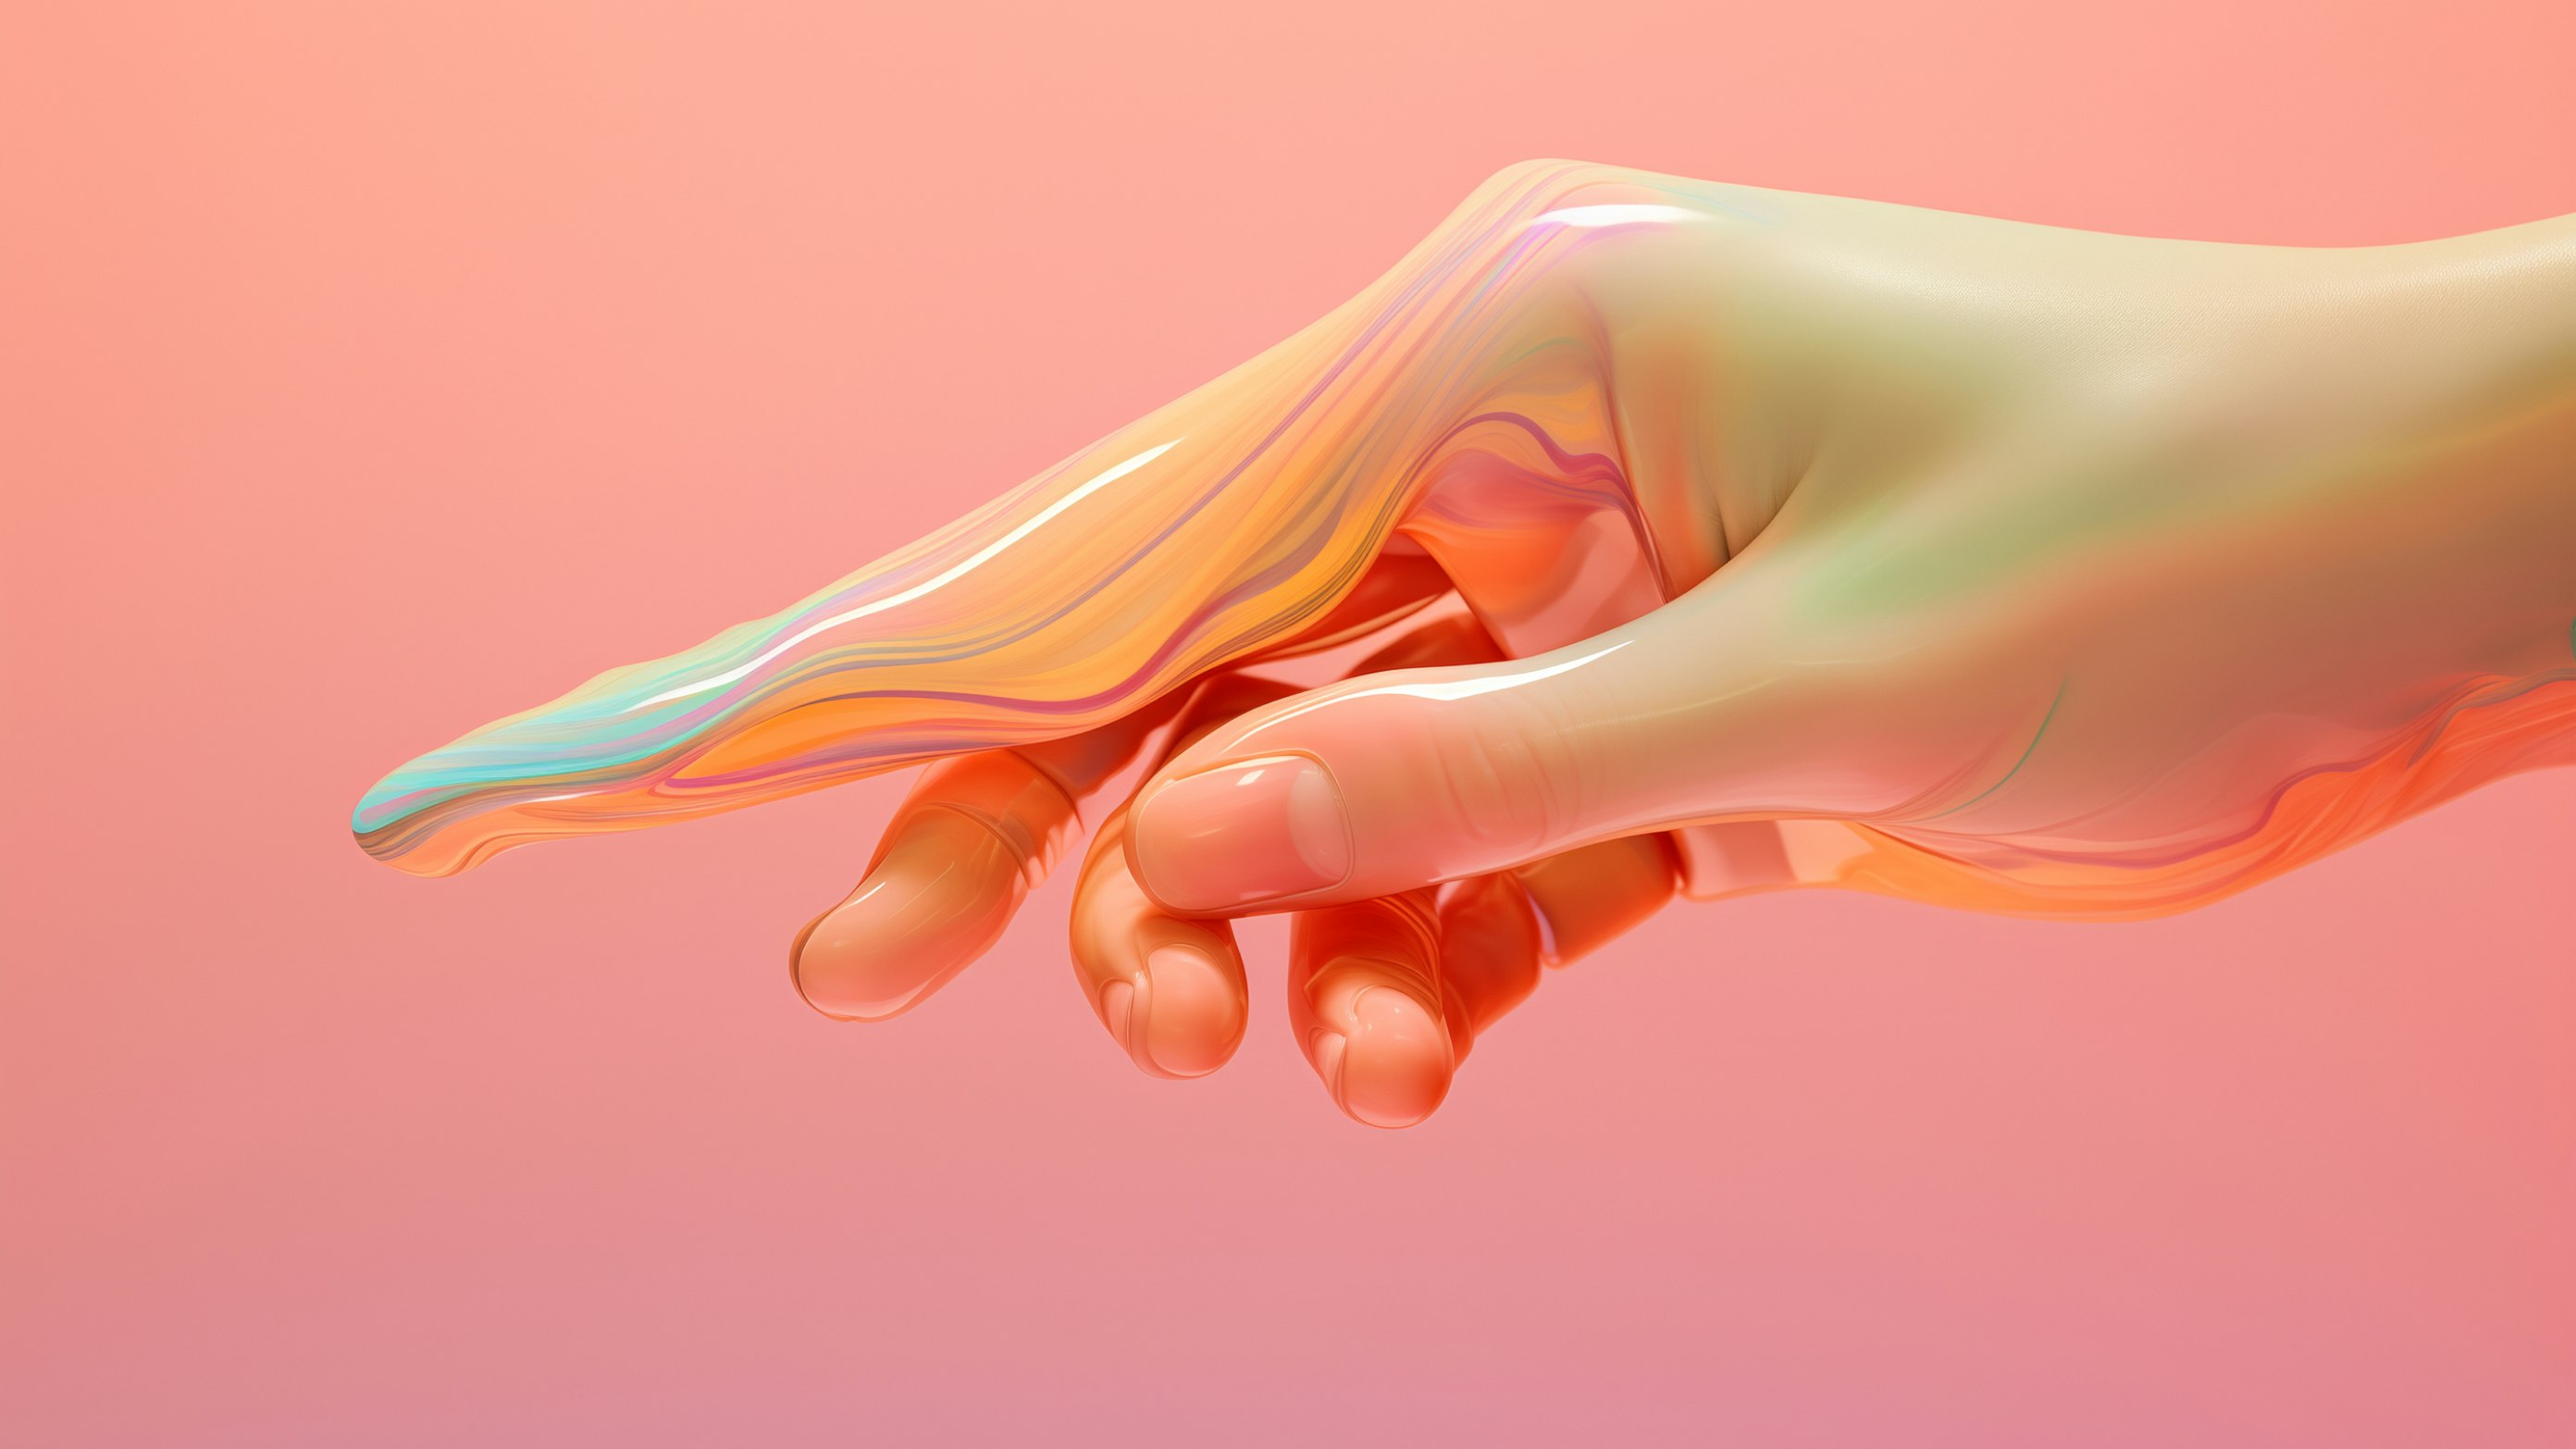 AI-generated 3D render of a humanoid hand that fades into an abstract semitransparent shiny veil in shades of pink and green